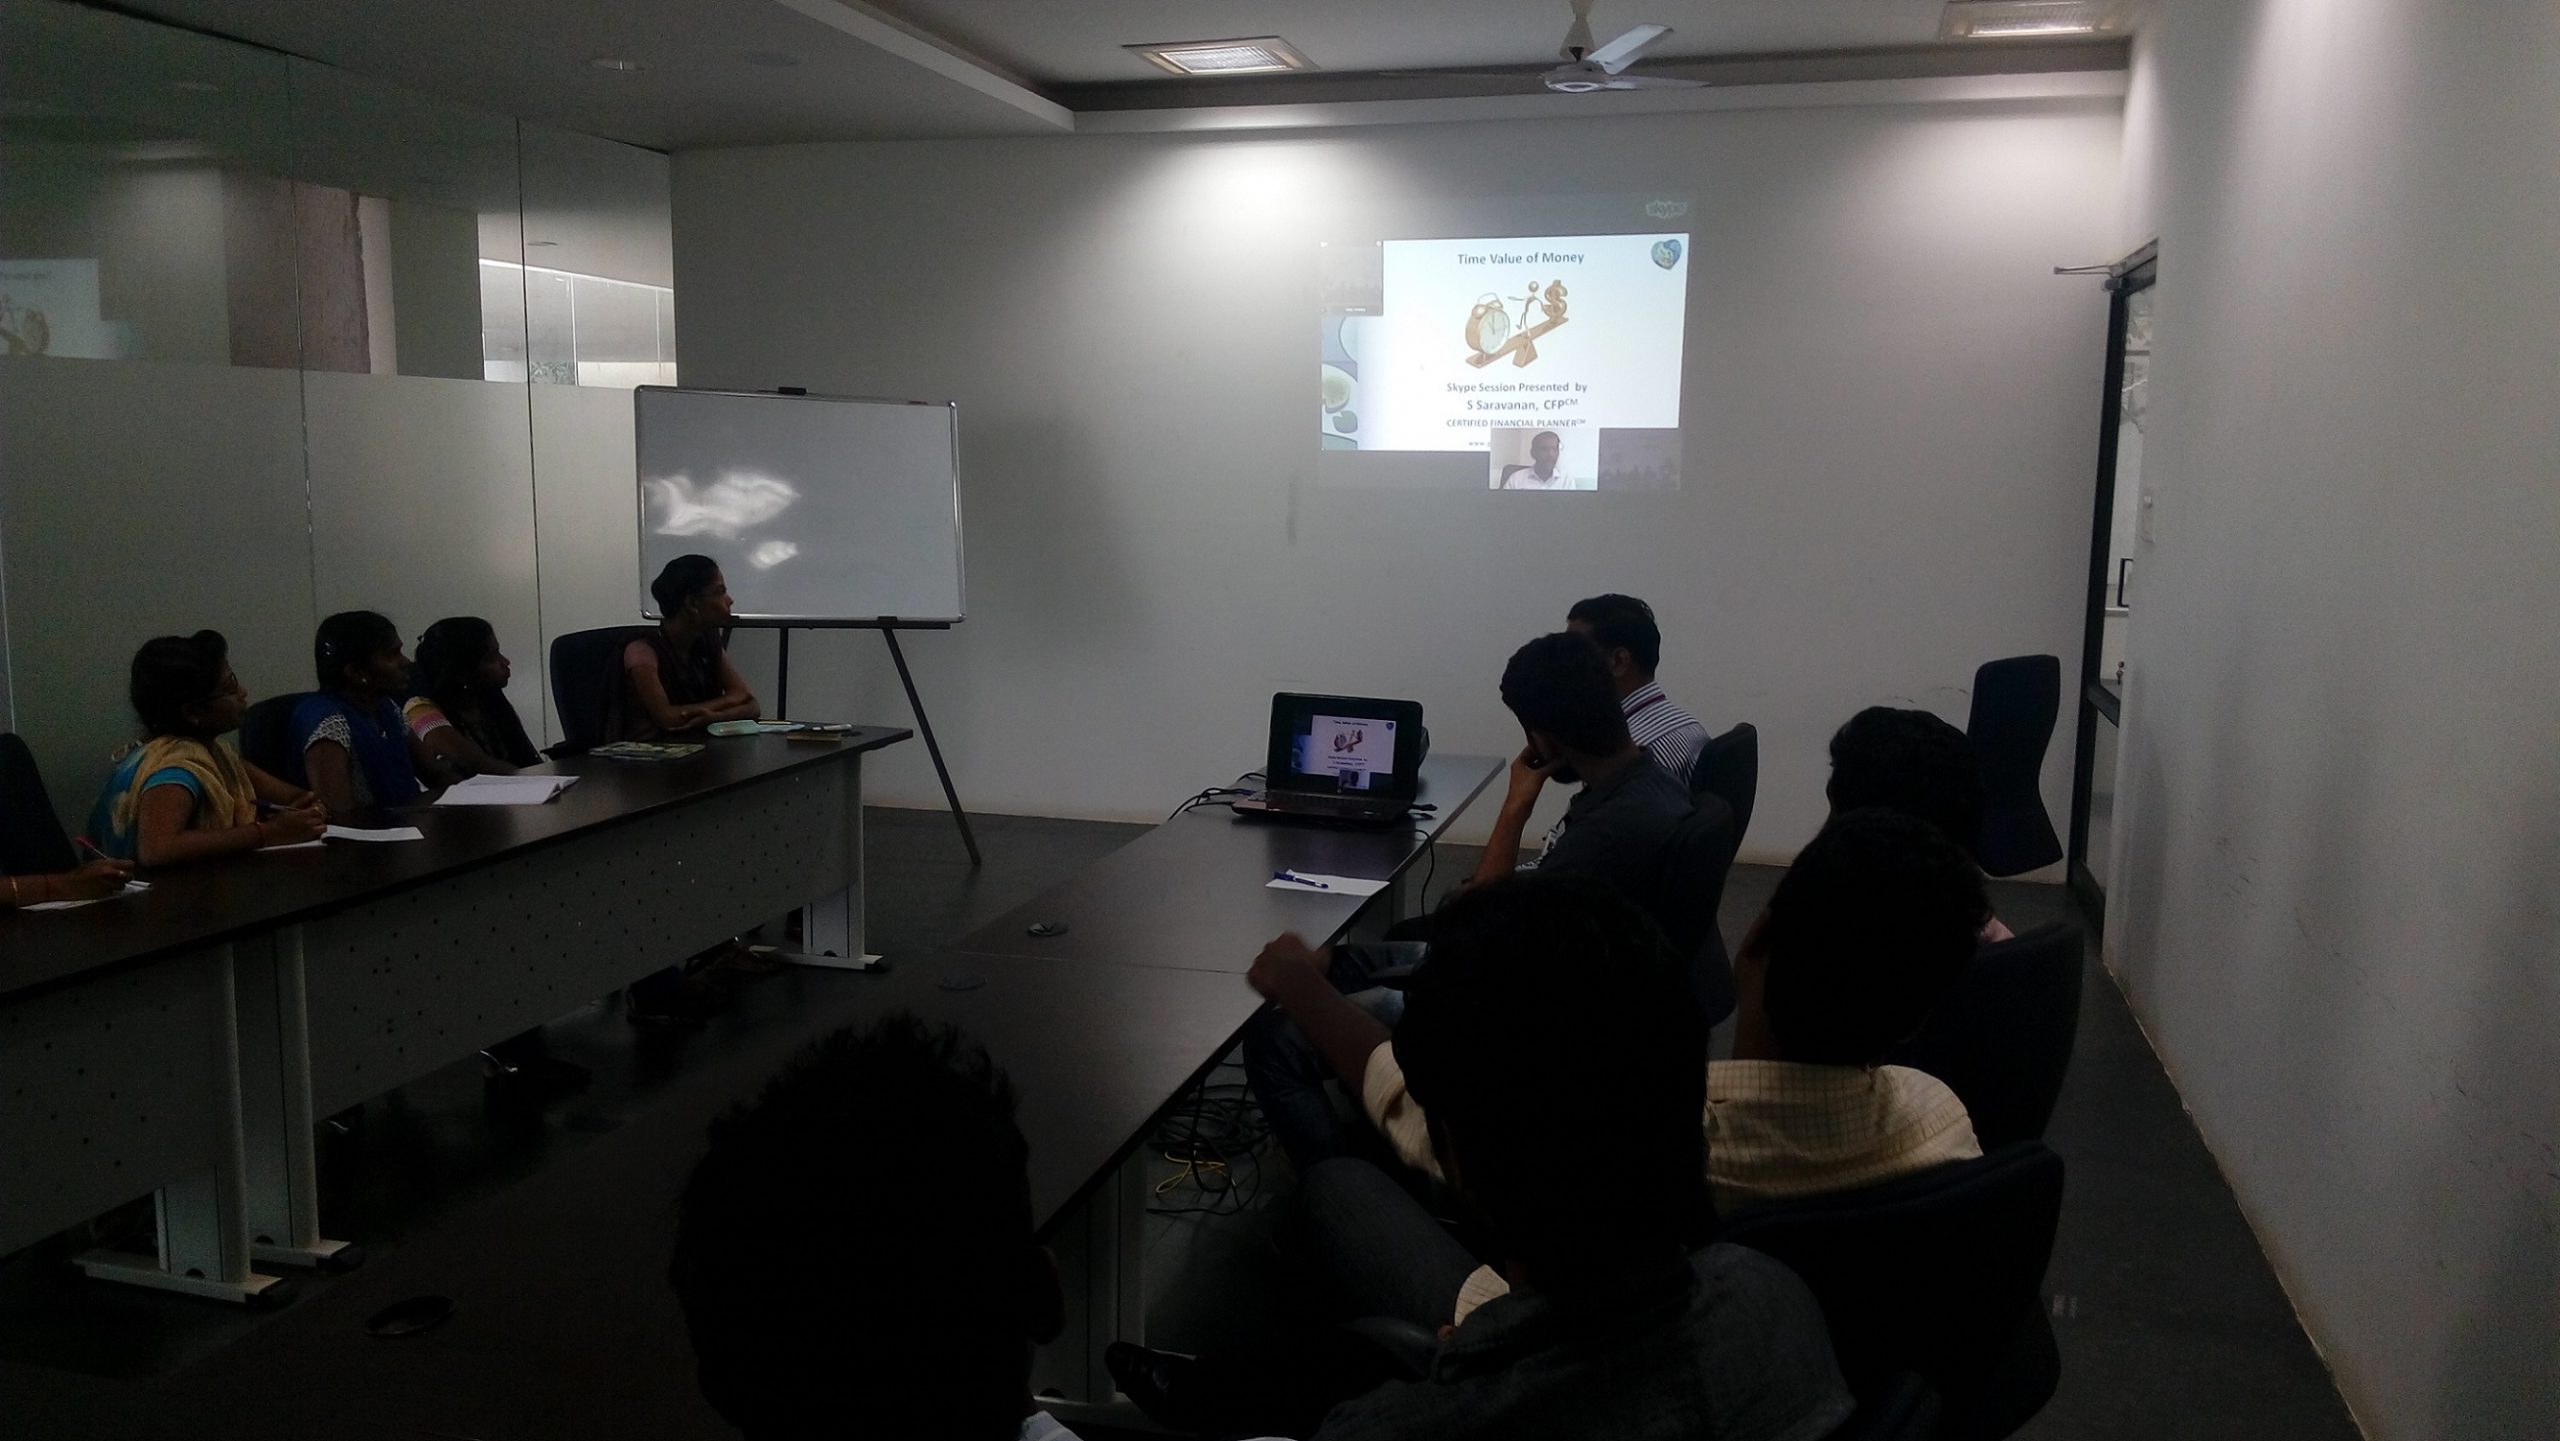 A Skype session on “Time Value of Money”